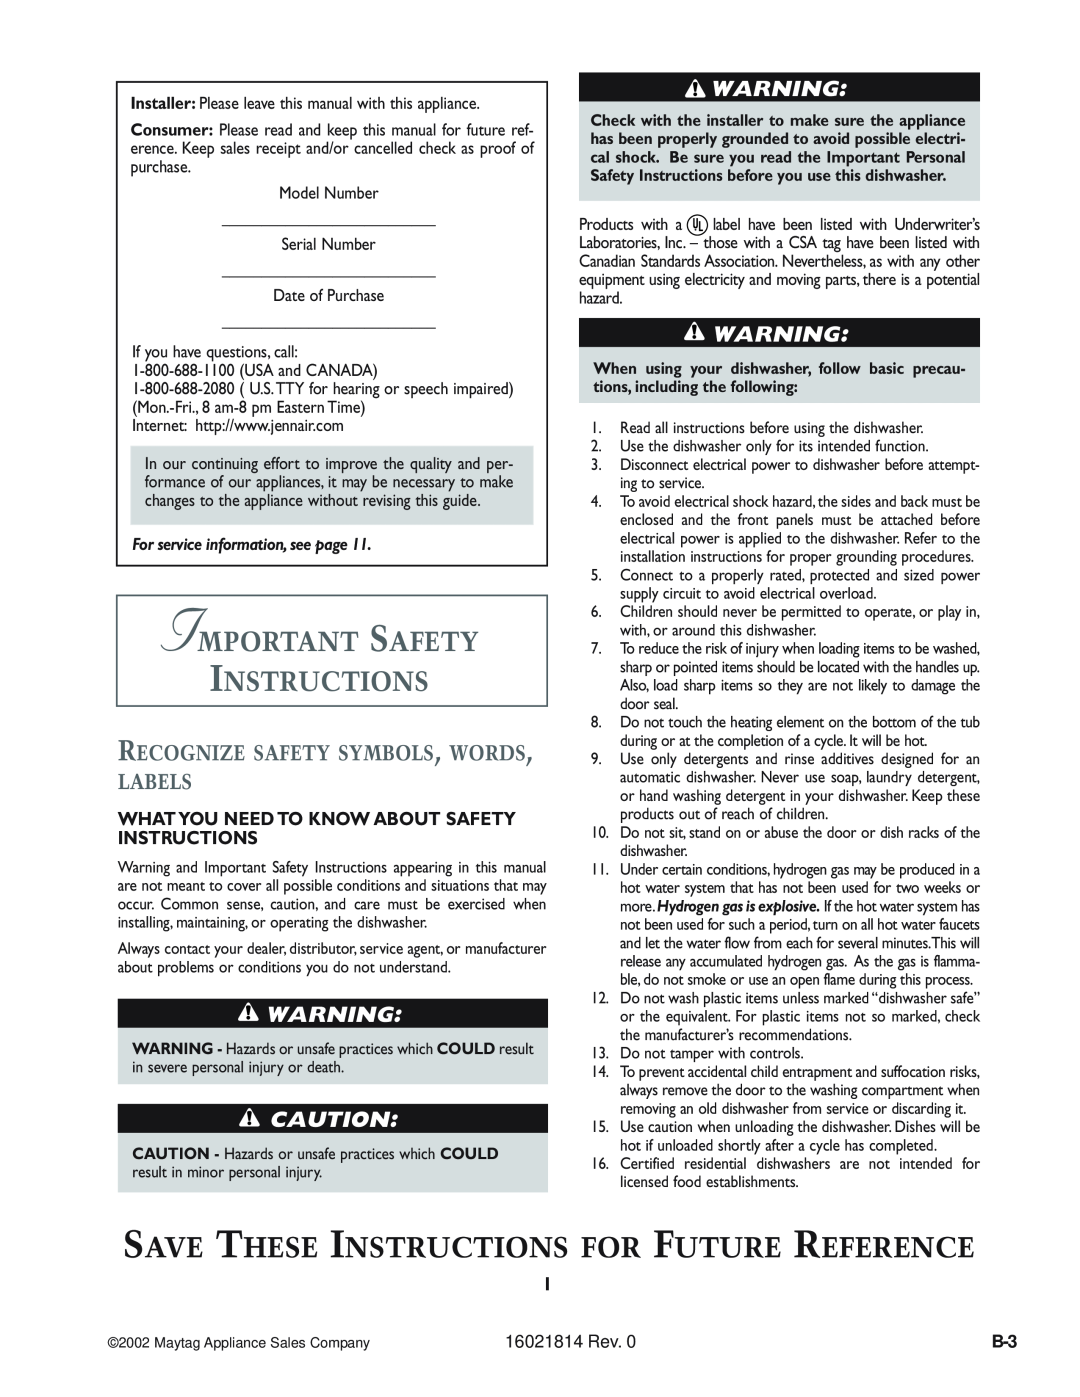 Maytag MDBF750AW Important Safety Instructions, Recognize Safety Symbols, Words, Labels, For service information, see page 